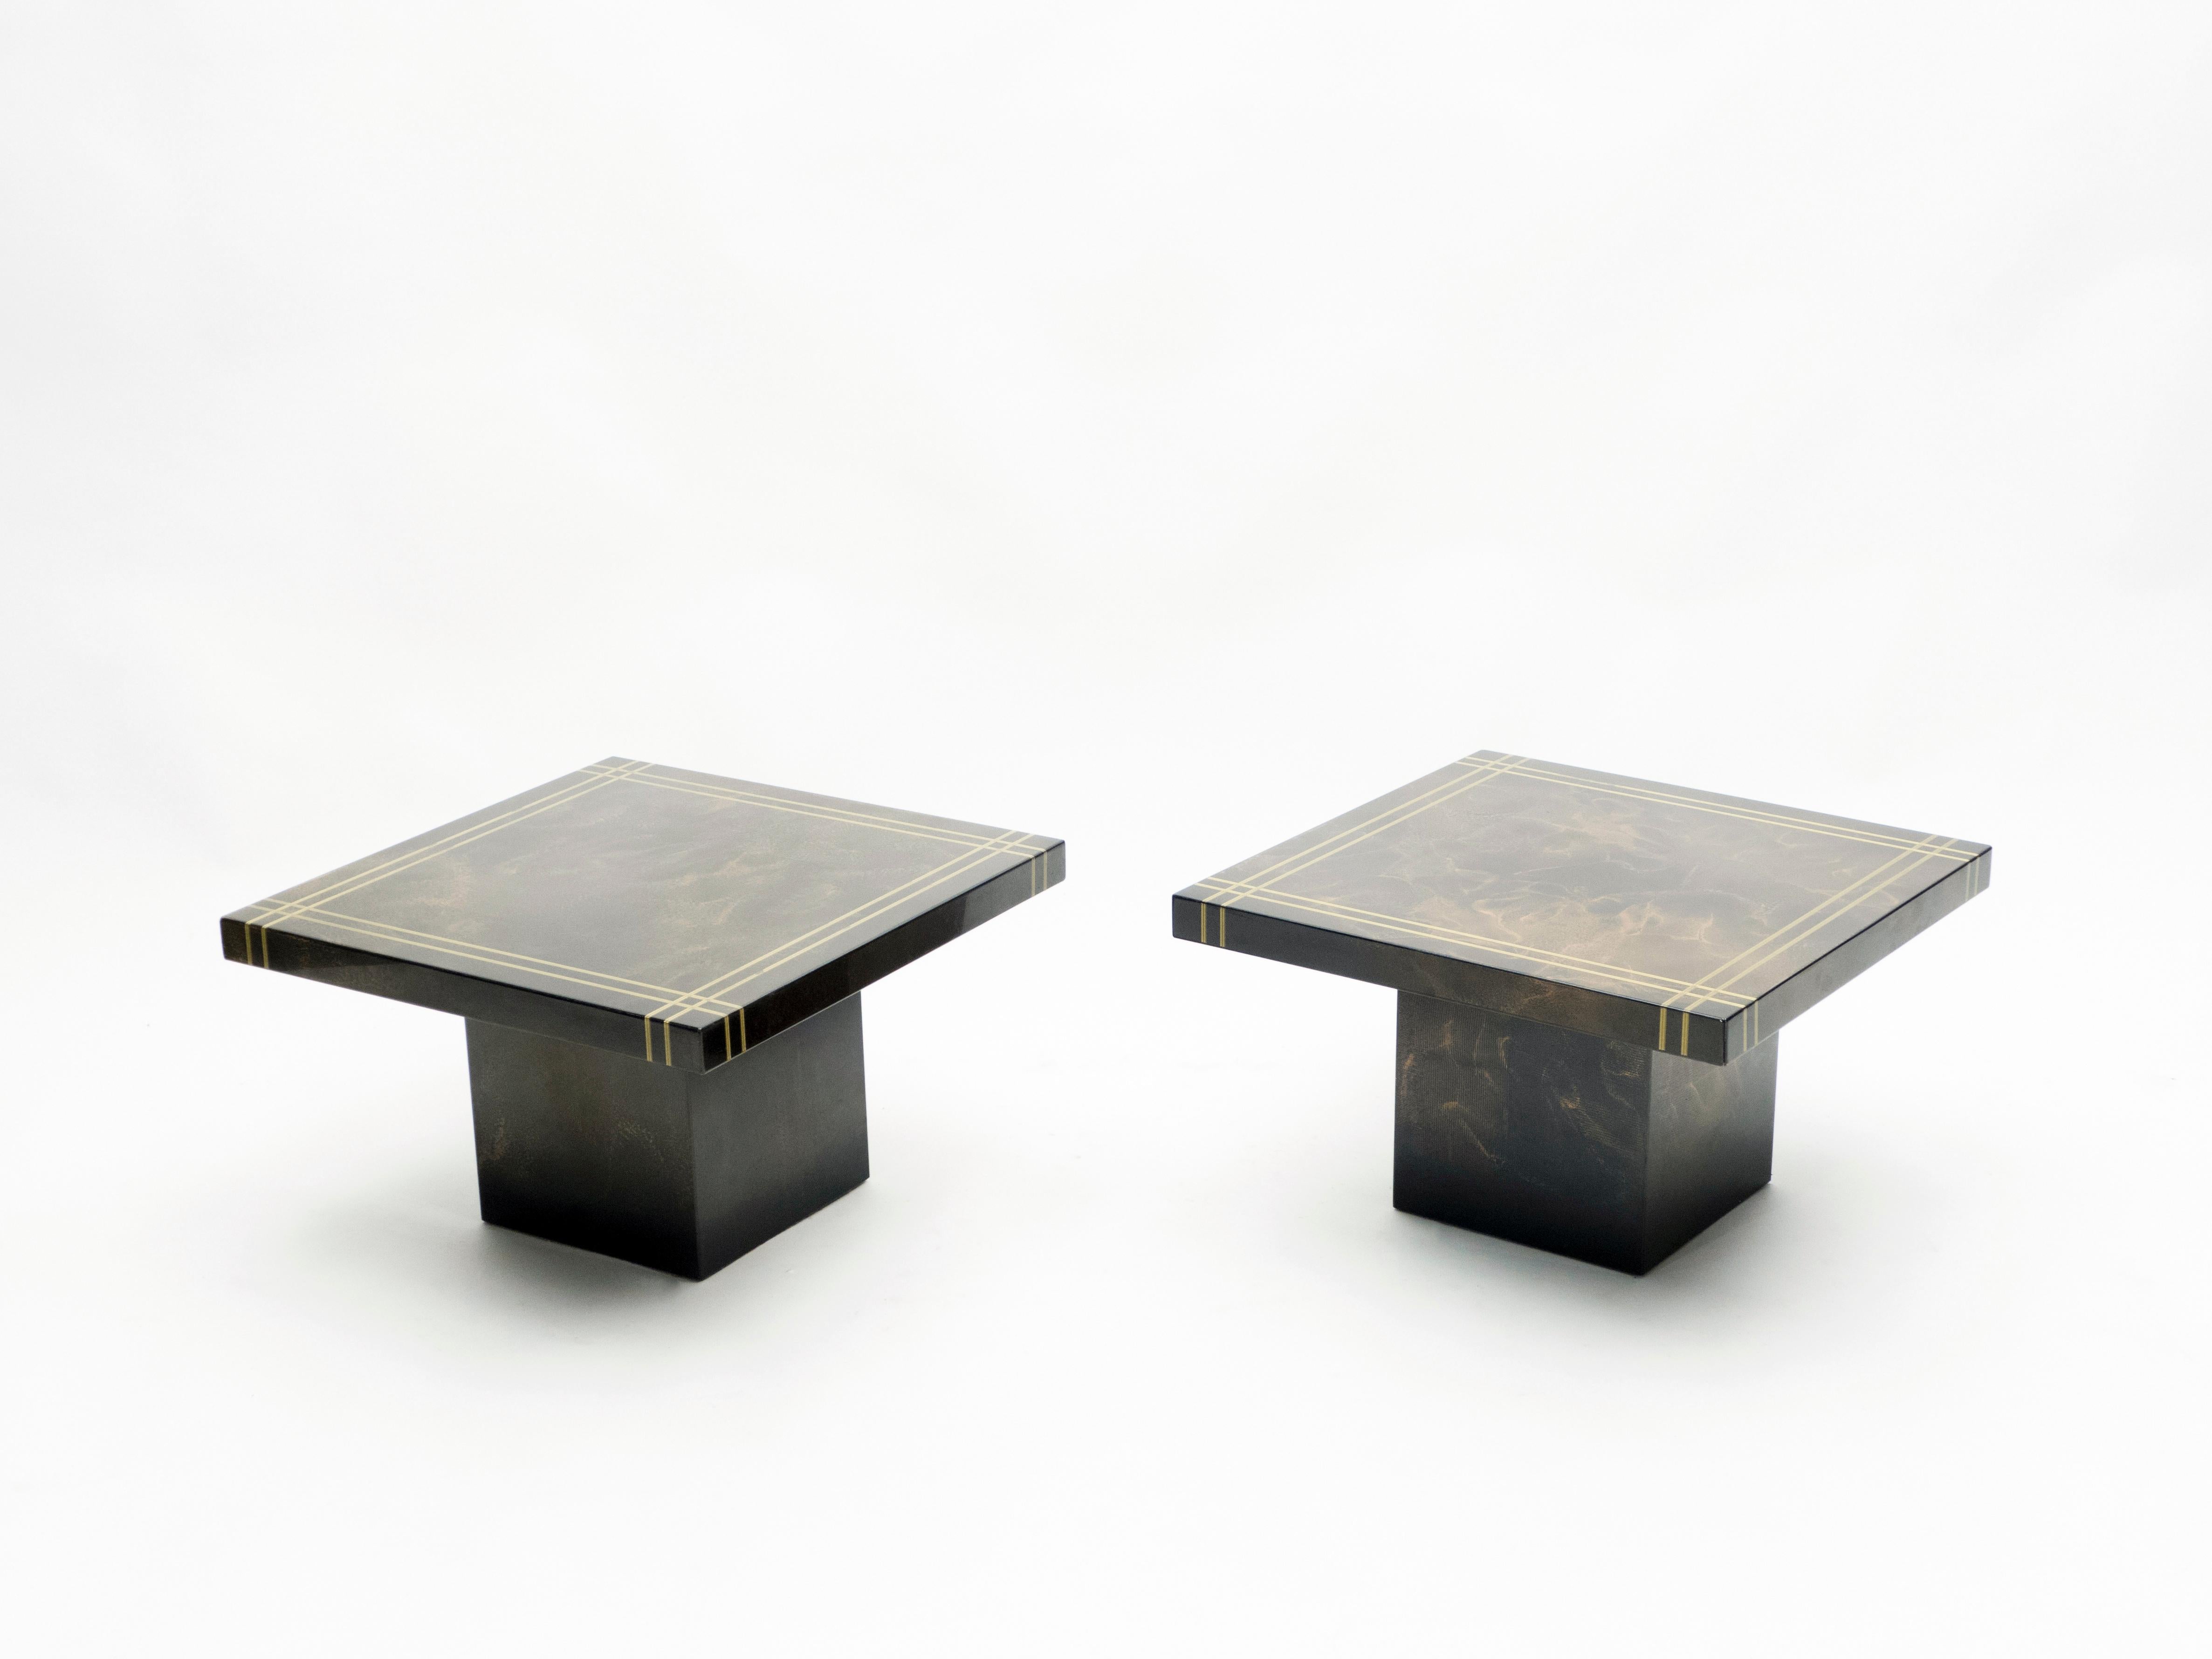 The boxy, clean design of these end tables, by Guy Lefevre for Ligne Roset, balances the best of Mid-Century Modern design with a contemporary look. The large squared surface is lacquered in shades of bronze, appearing dappled, with light patches